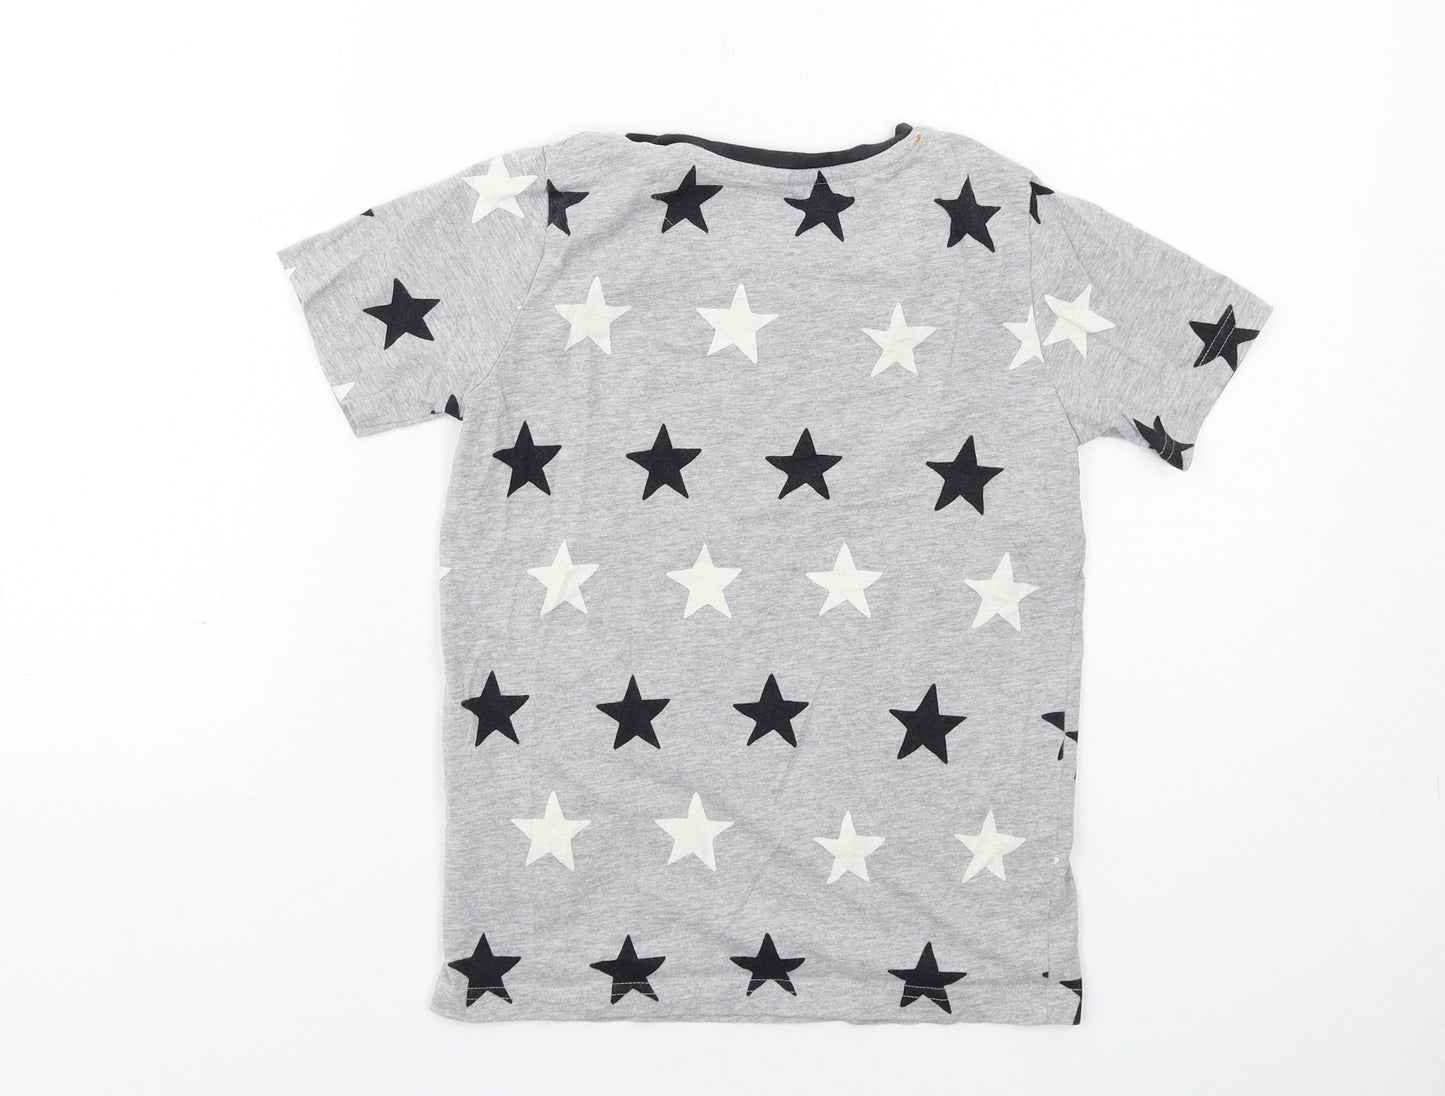 Marks and Spencer Boys Grey Geometric Cotton Basic T-Shirt Size 9-10 Years Crew Neck Pullover - Star Print